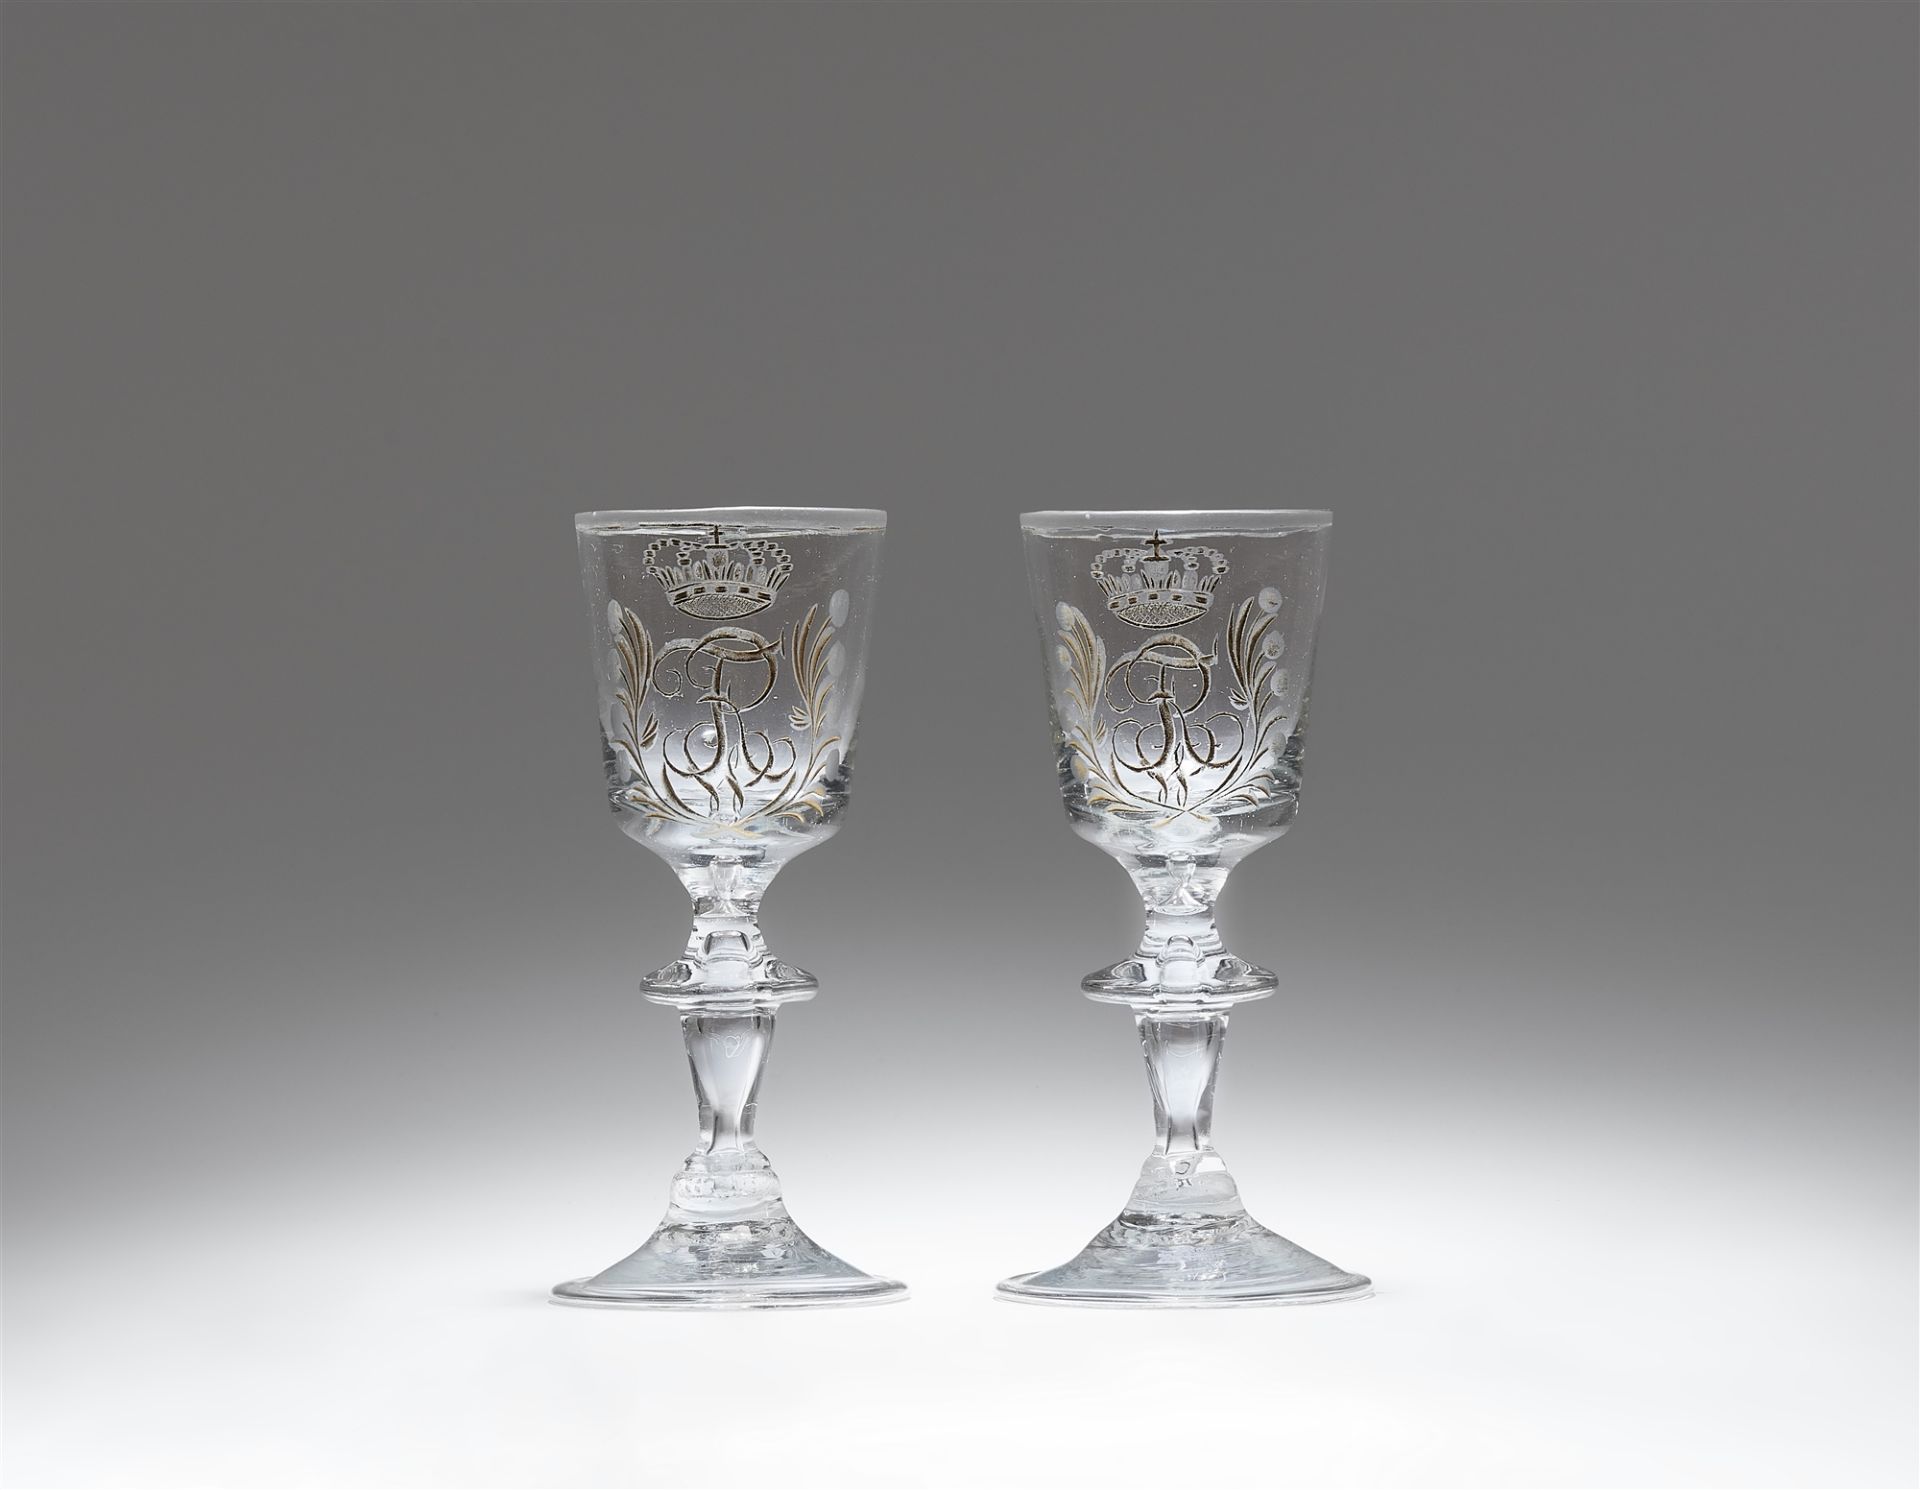 A pair of cut glass goblets commemorating King Friedrich Wilhelm II